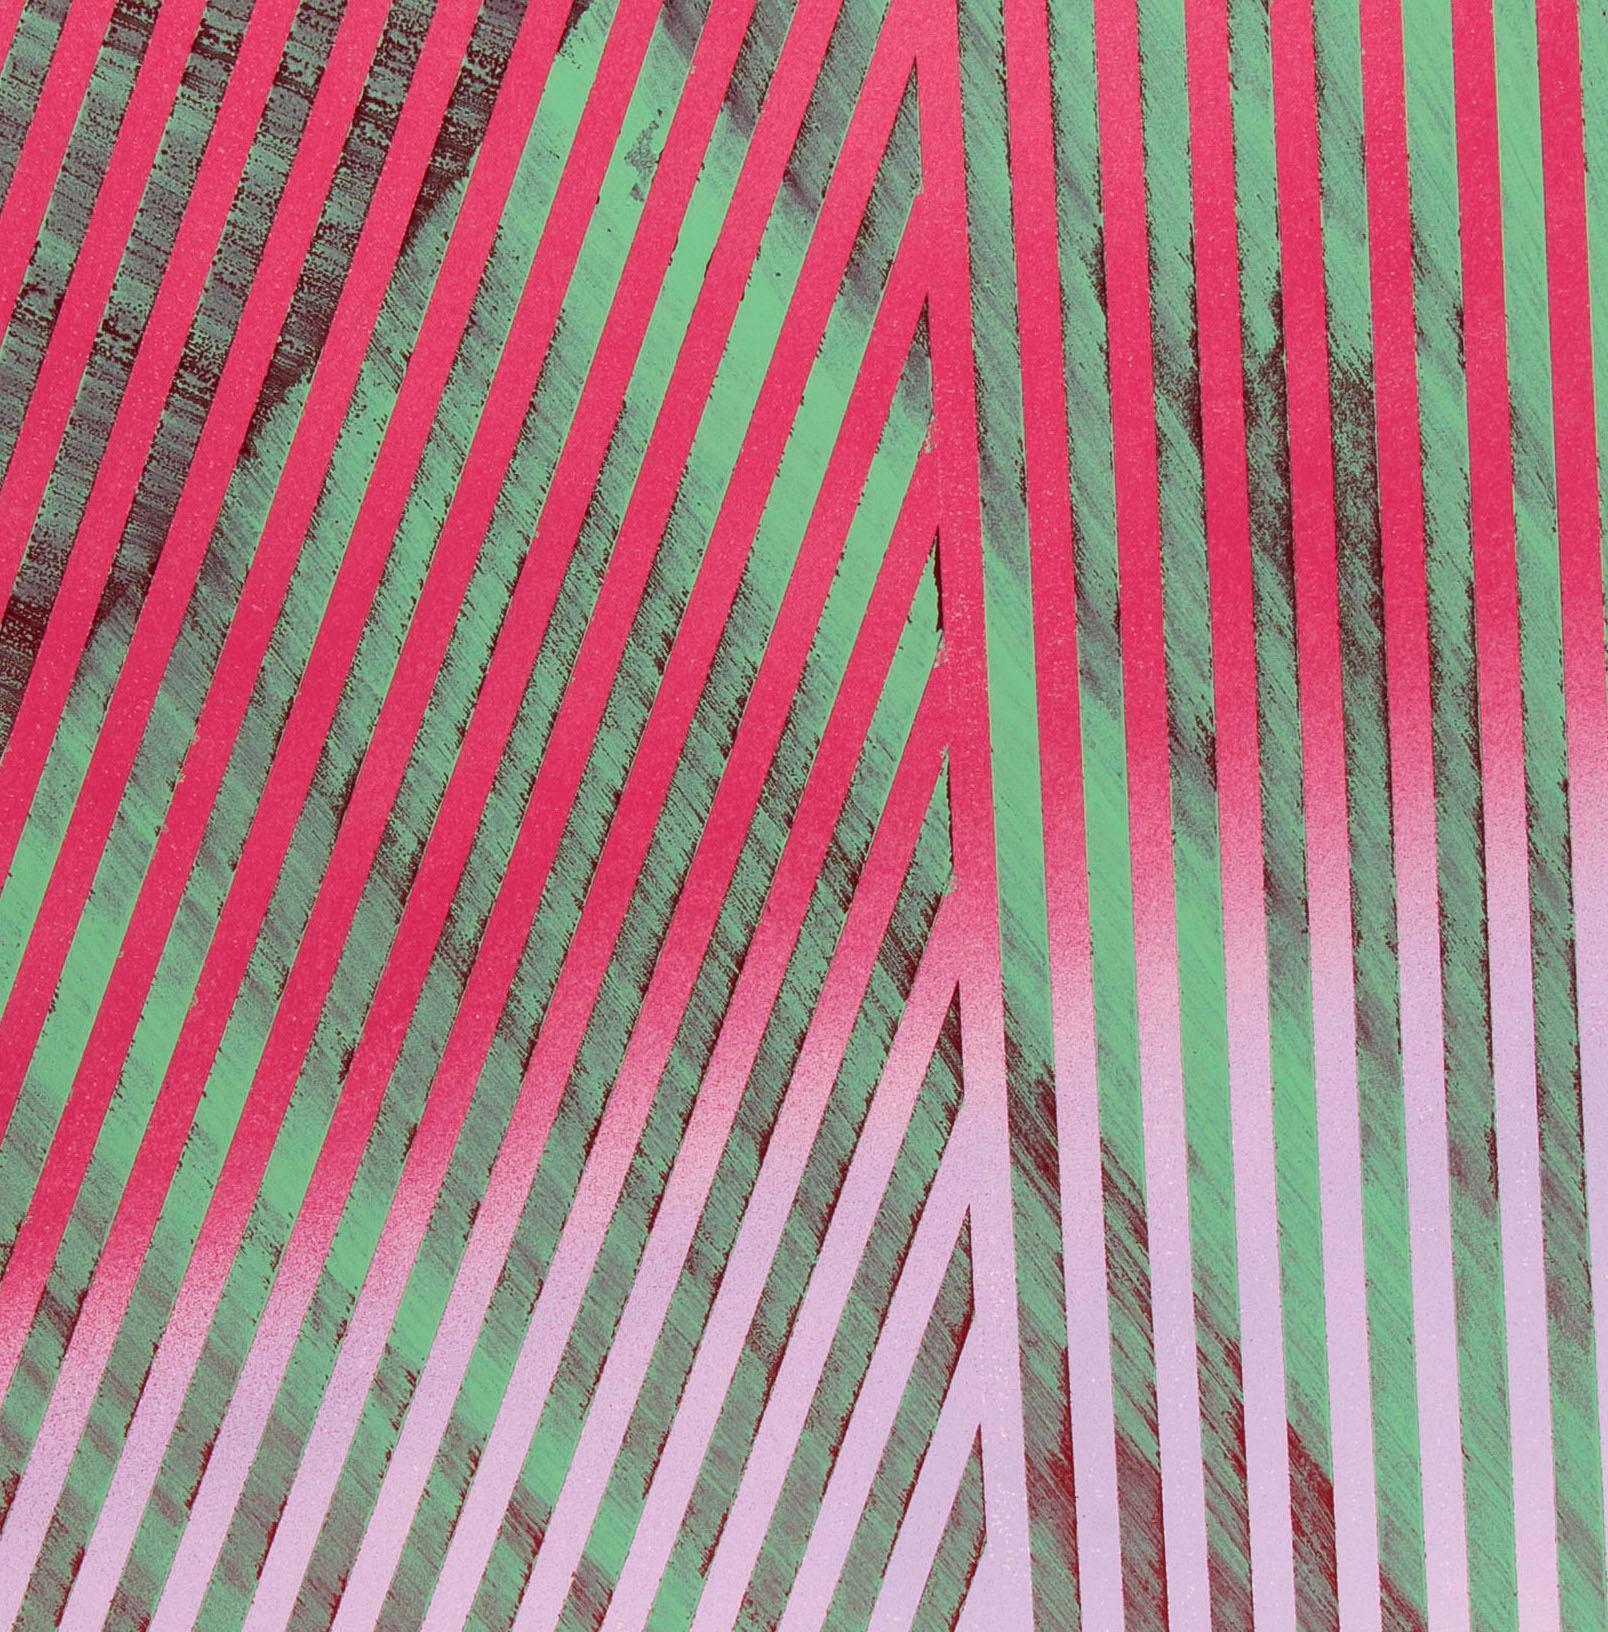 Prismatic Polygon XX: geometric abstract painting w/ pattern. Red, green, pink. - Painting by Jay Walker